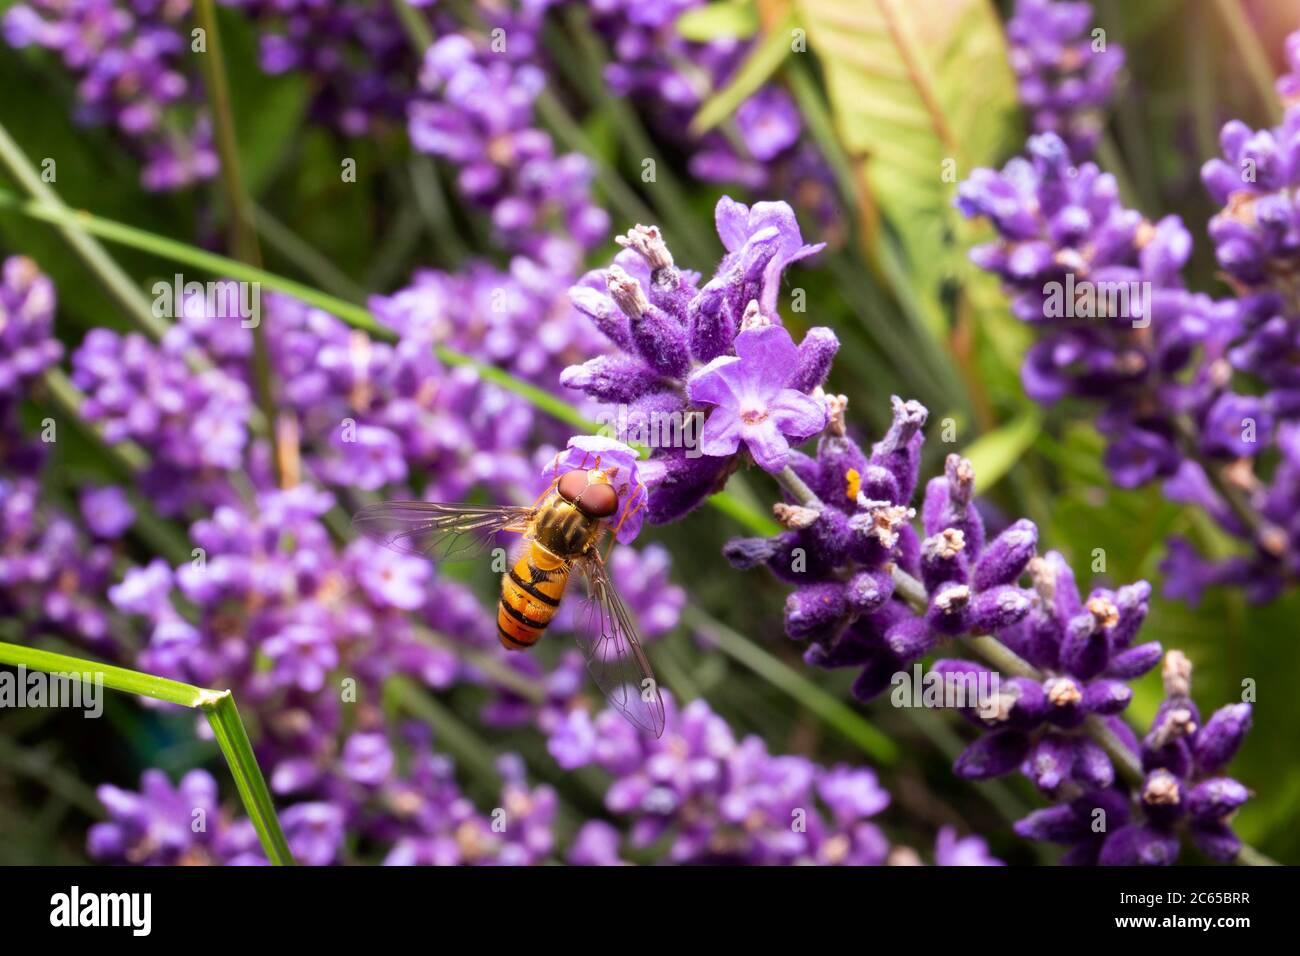 Hoverfly feeding on purple flowers. Macro photo of insect on lavender. Summer time. Stock Photo